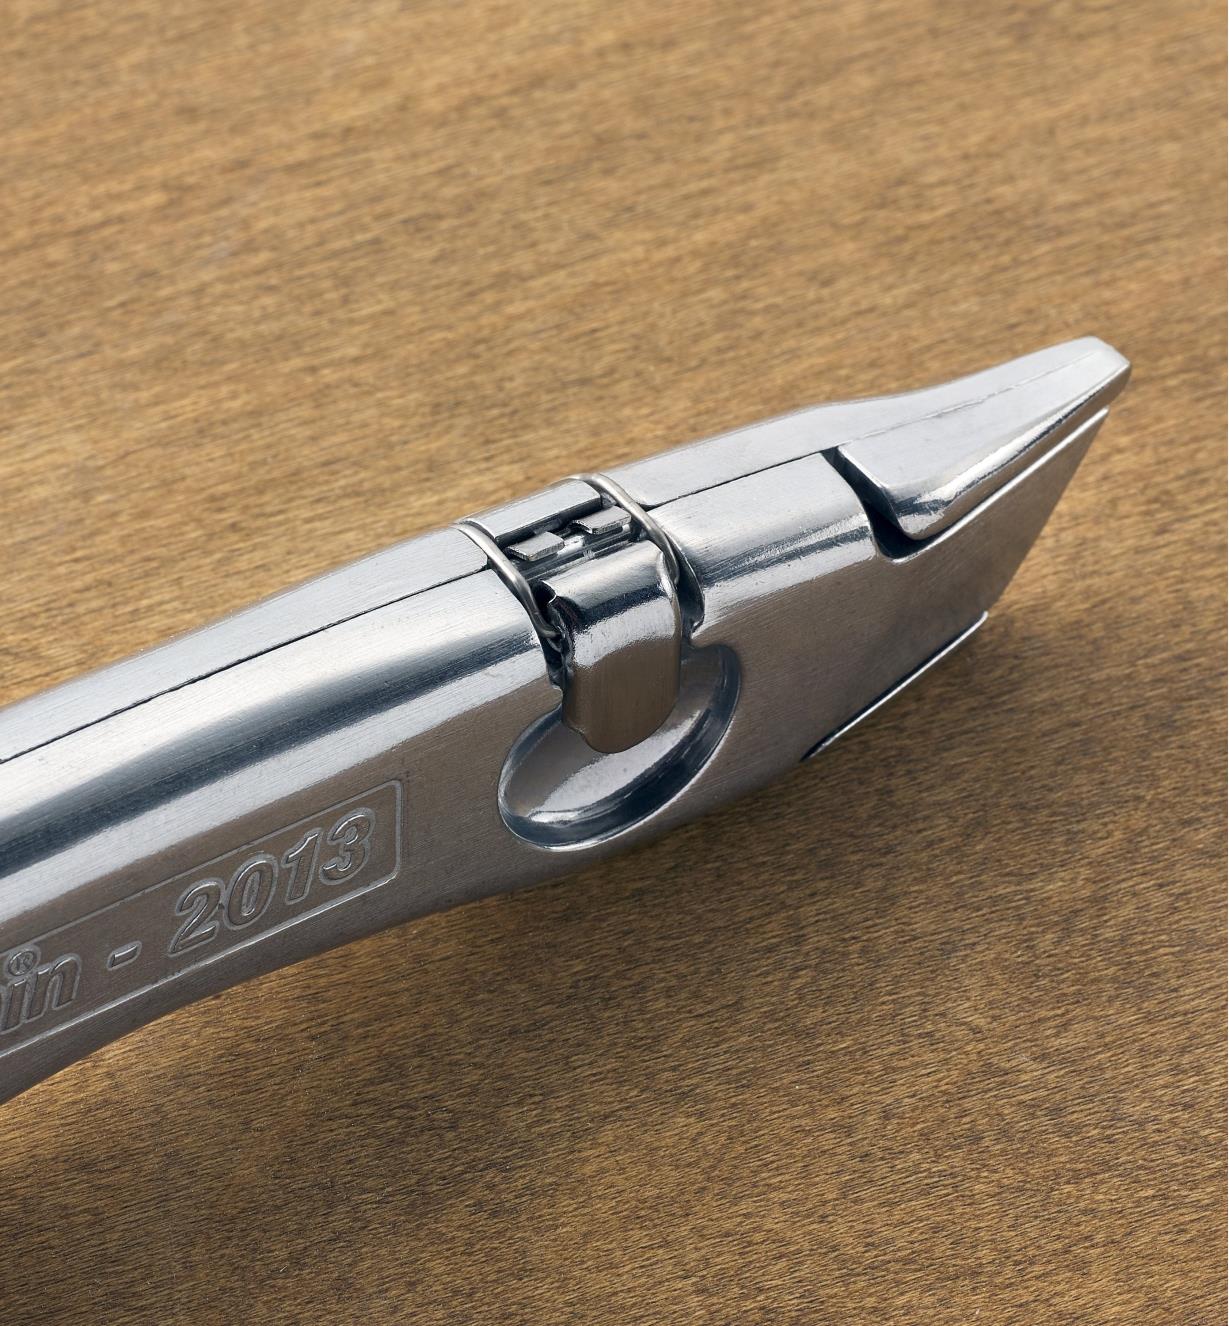 A close-up top view of the Delphin 2013 retractable knife held closed by the draw latch